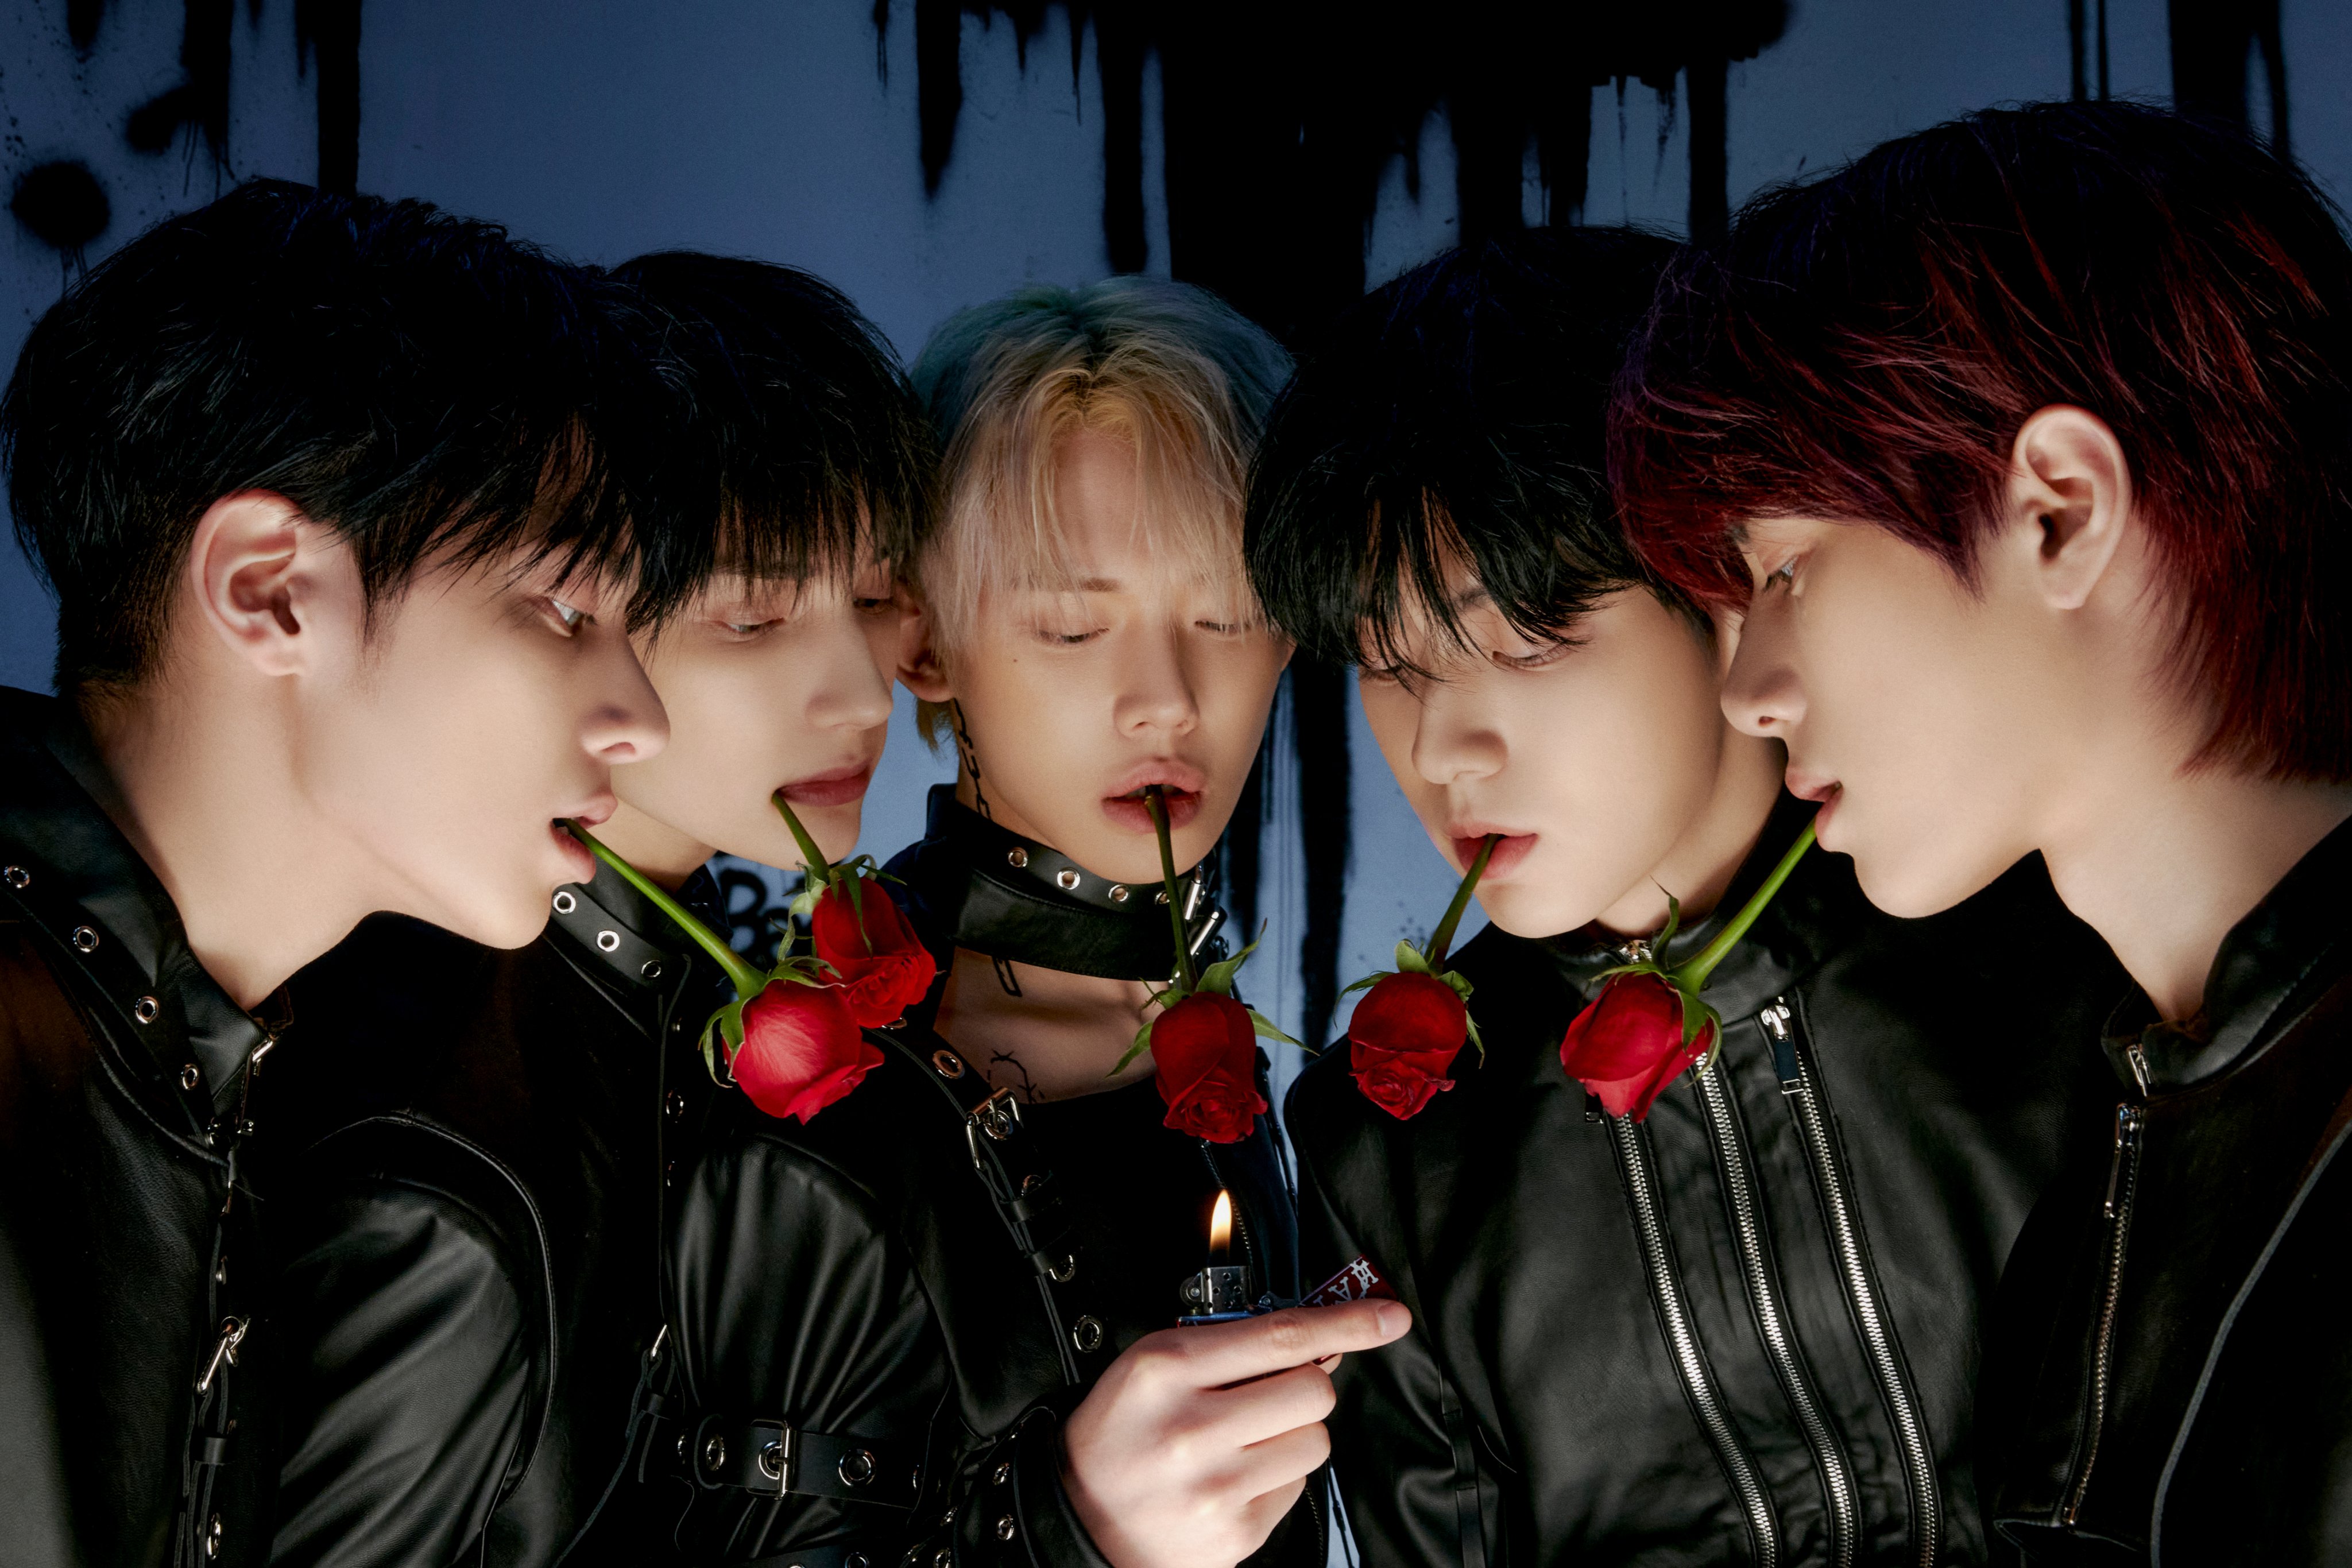 The members of TXT stand together with roses in their mouths